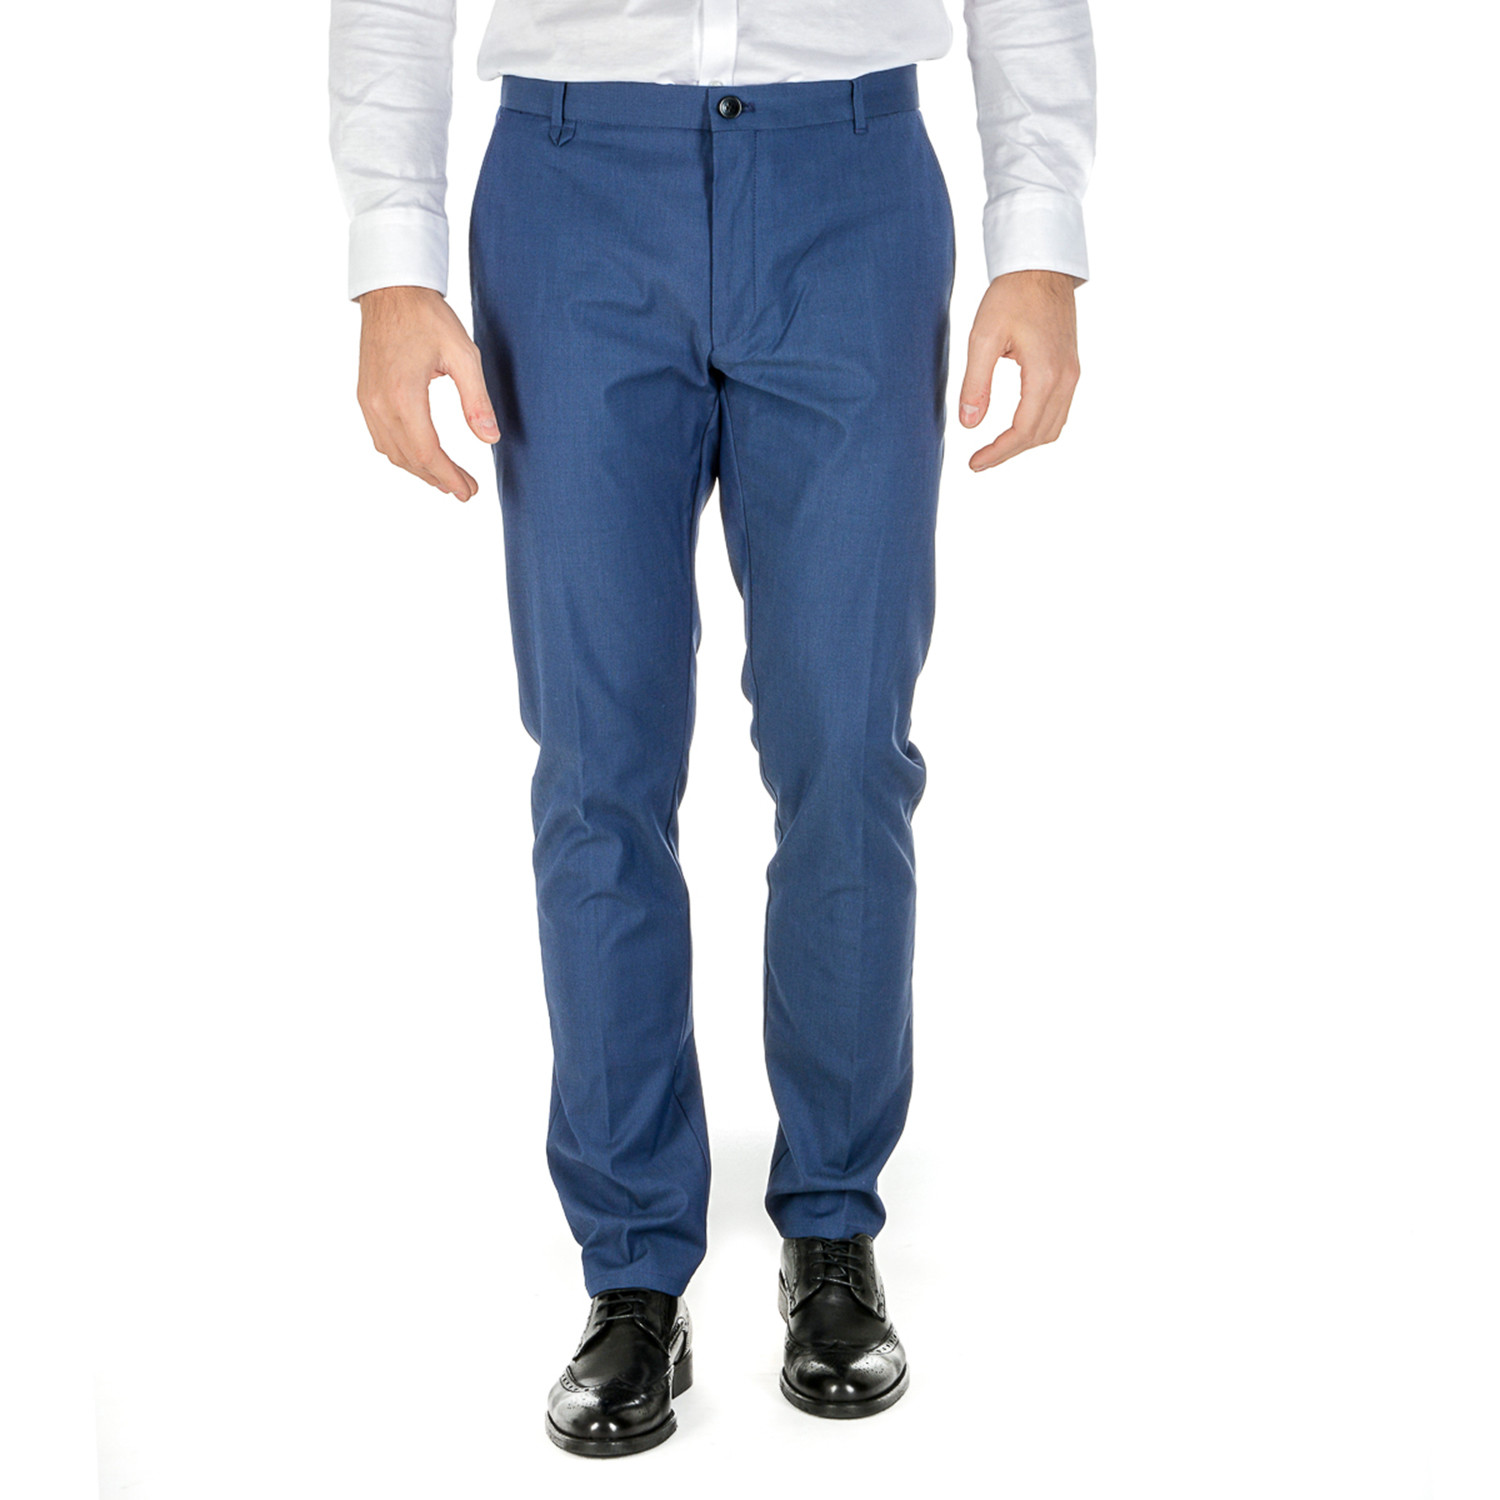 hugo boss trousers size guide